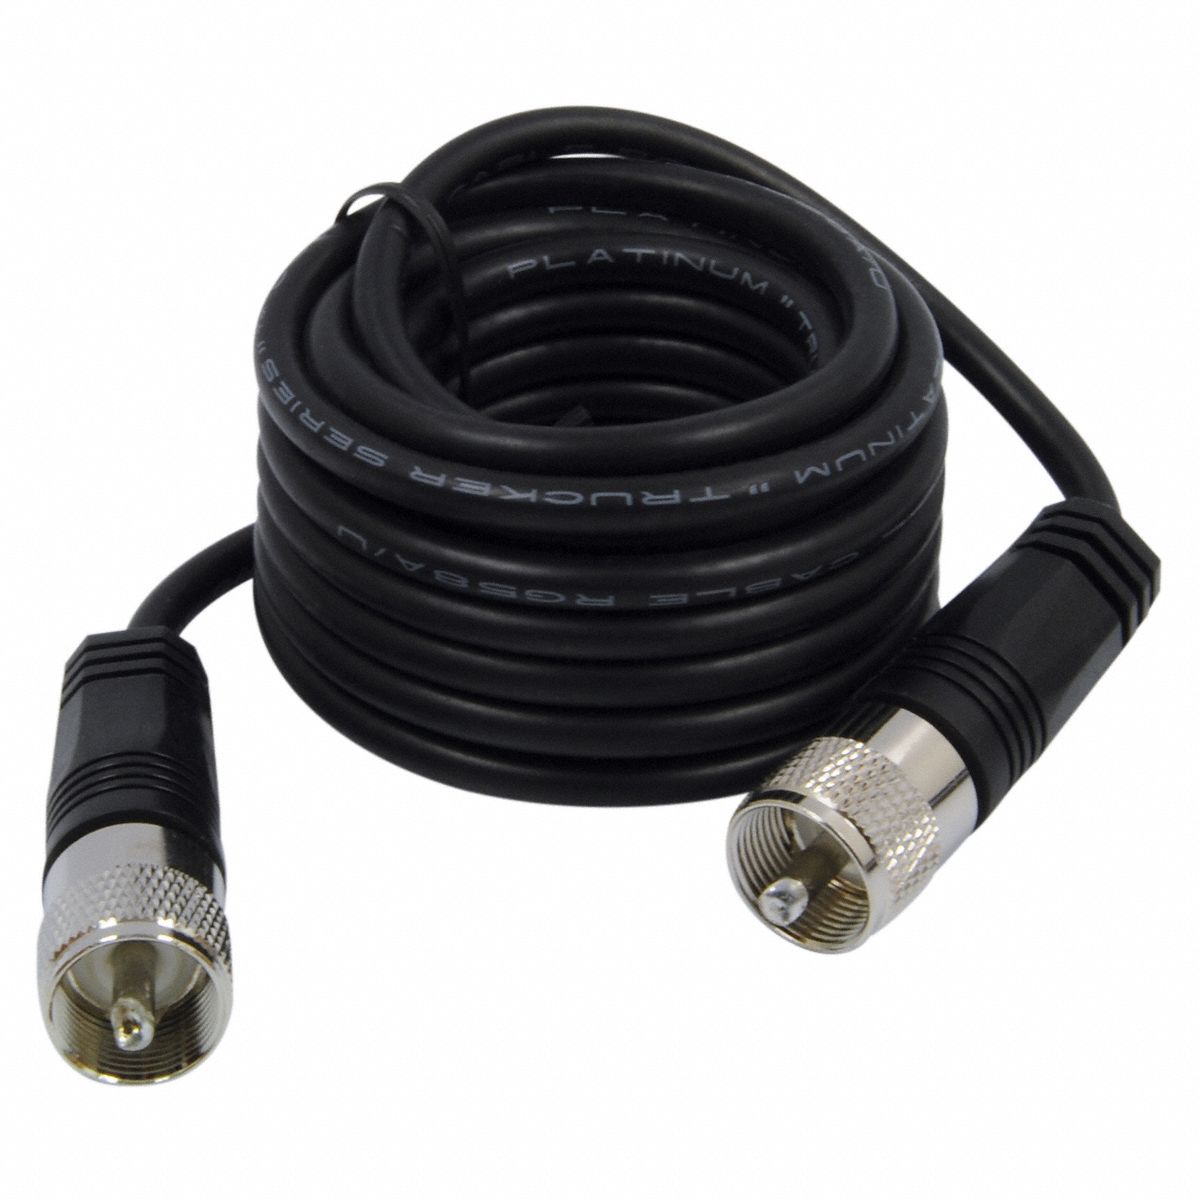 Coax Cable,PL-259 Connector,12 ft.